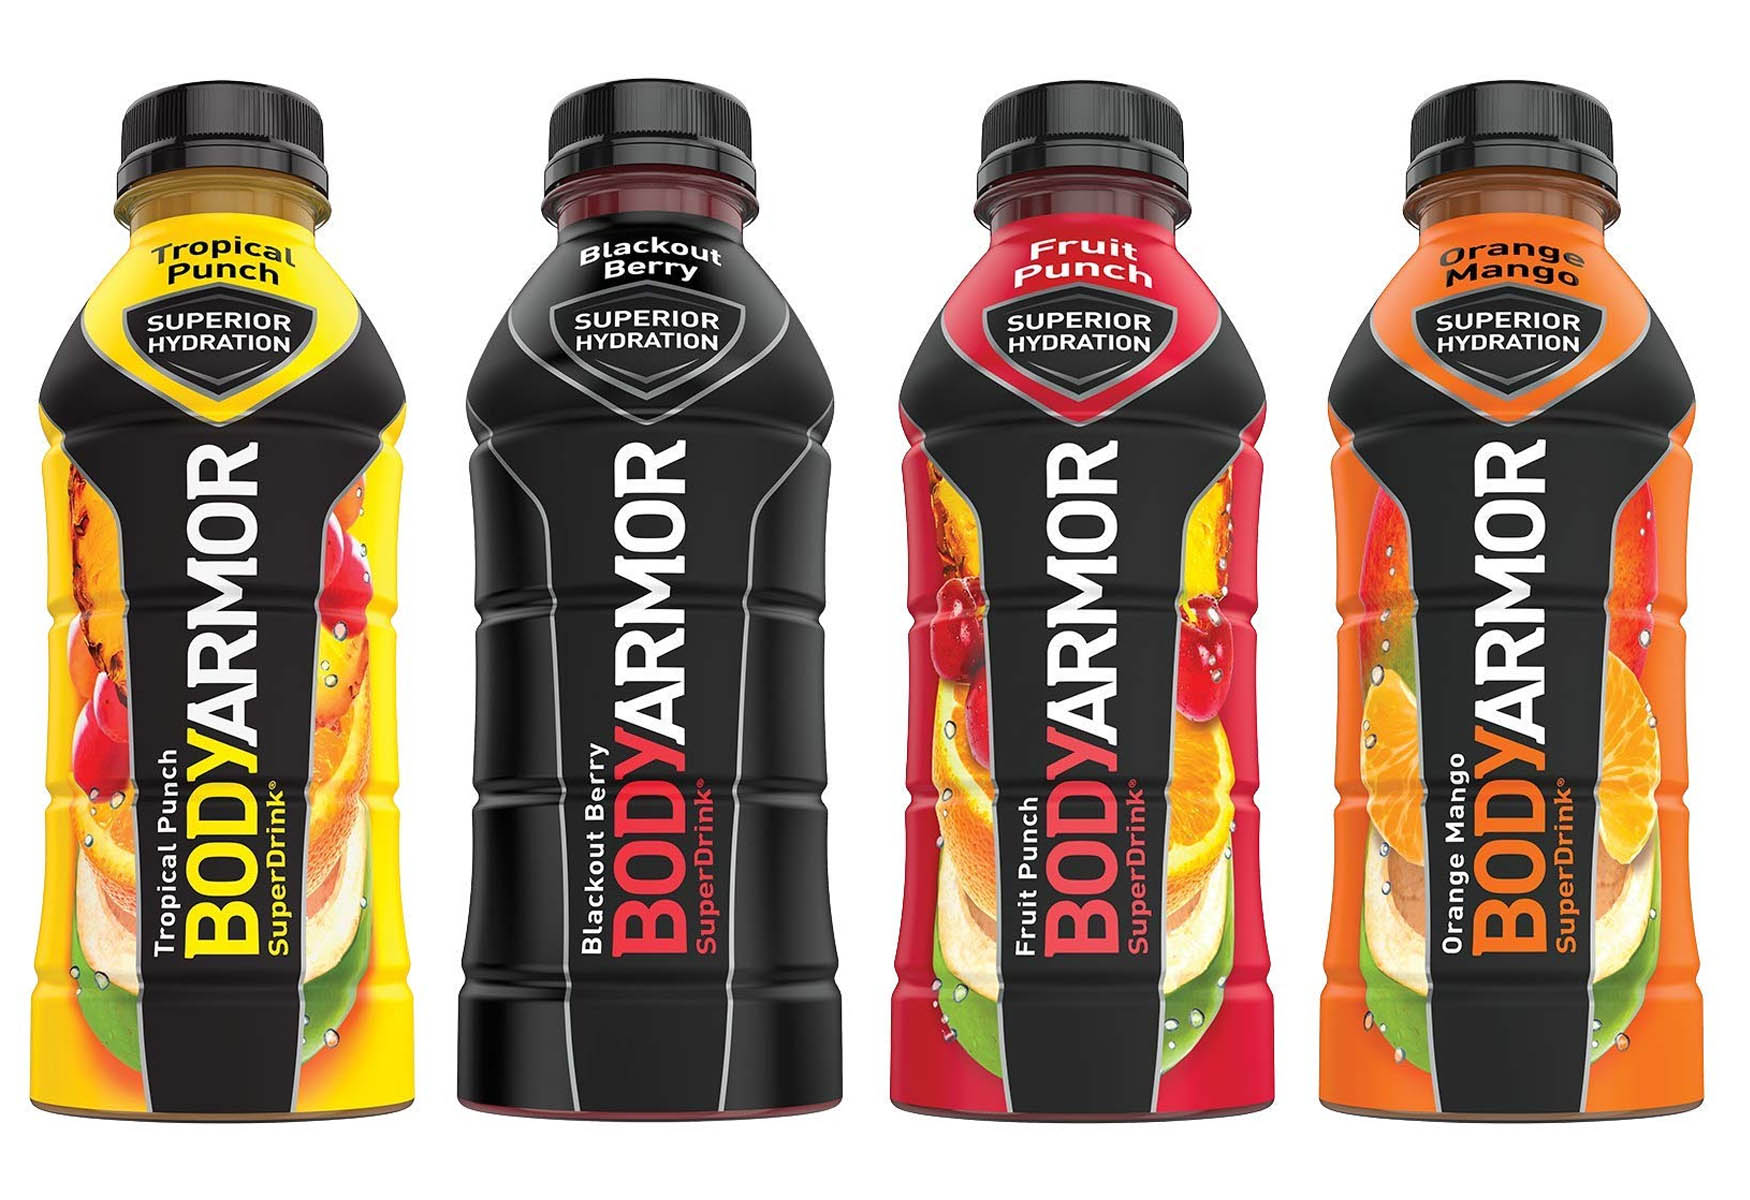 Body Armor Super Drink Nutrition Facts